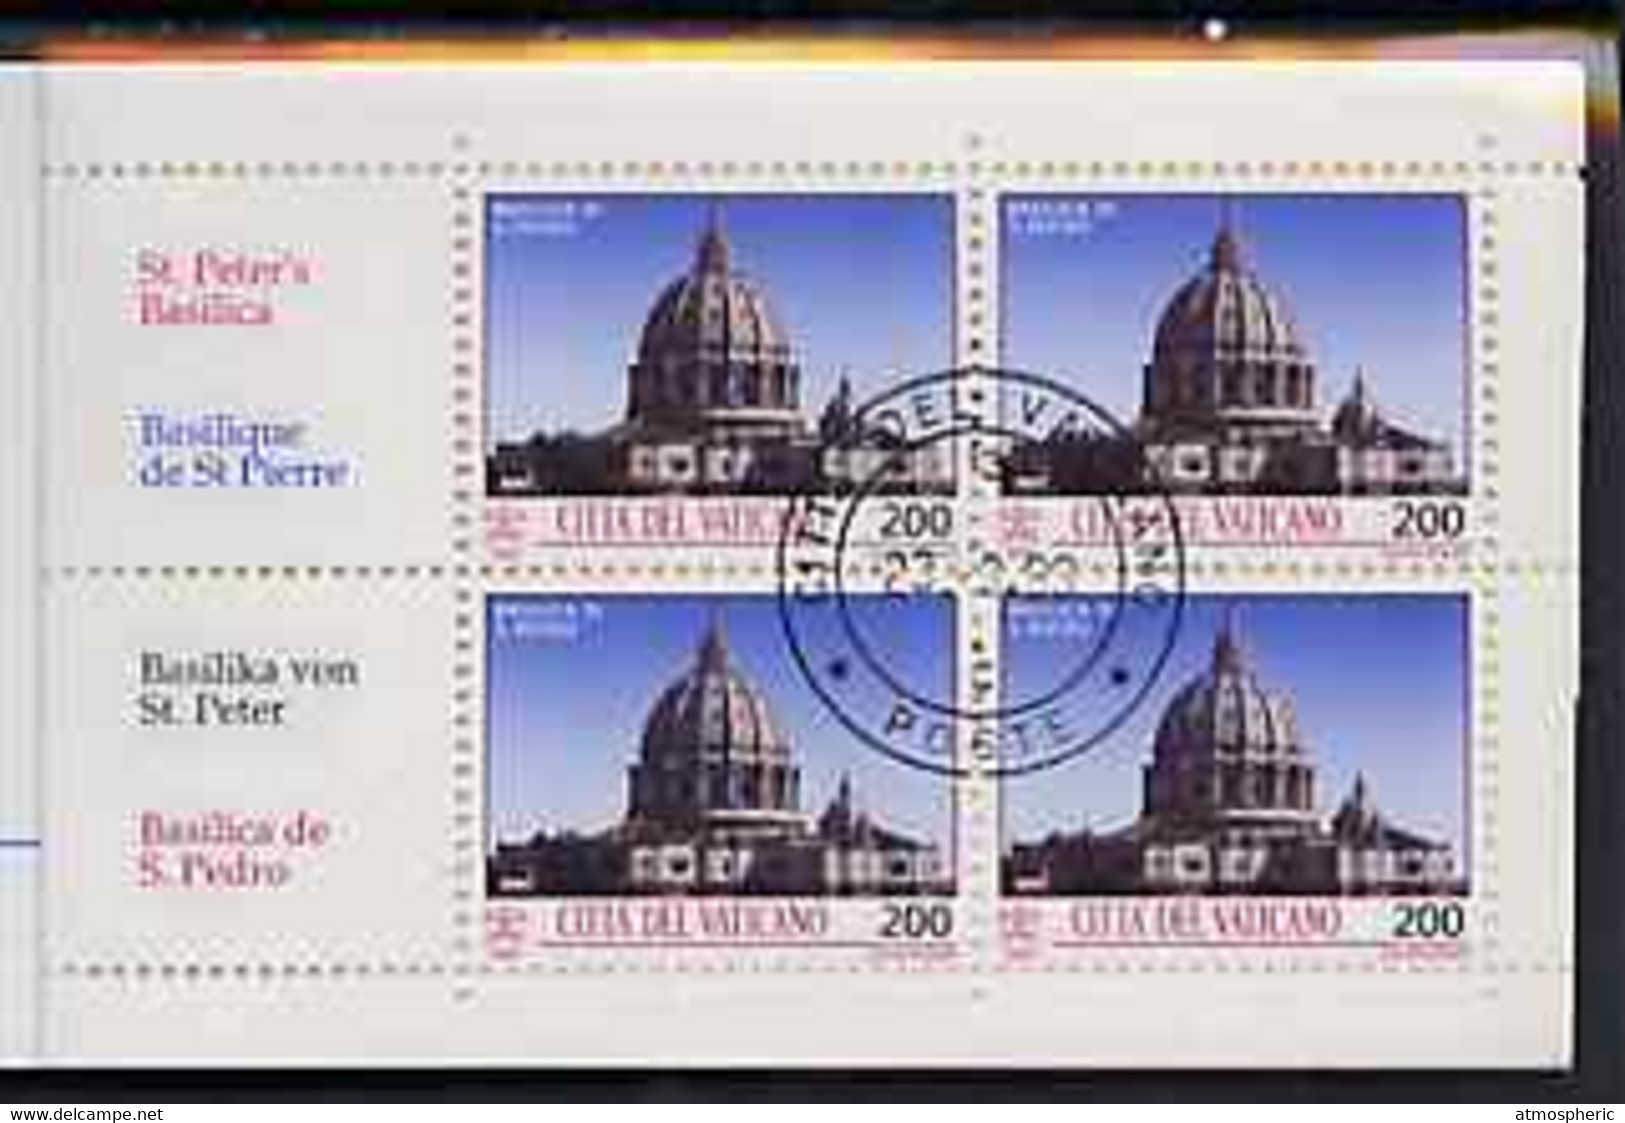 Booklet - Vatican City 1993 Architectural Treasures 5400L Booklet Complete With First Day Cancels, SG SB4 - Libretti